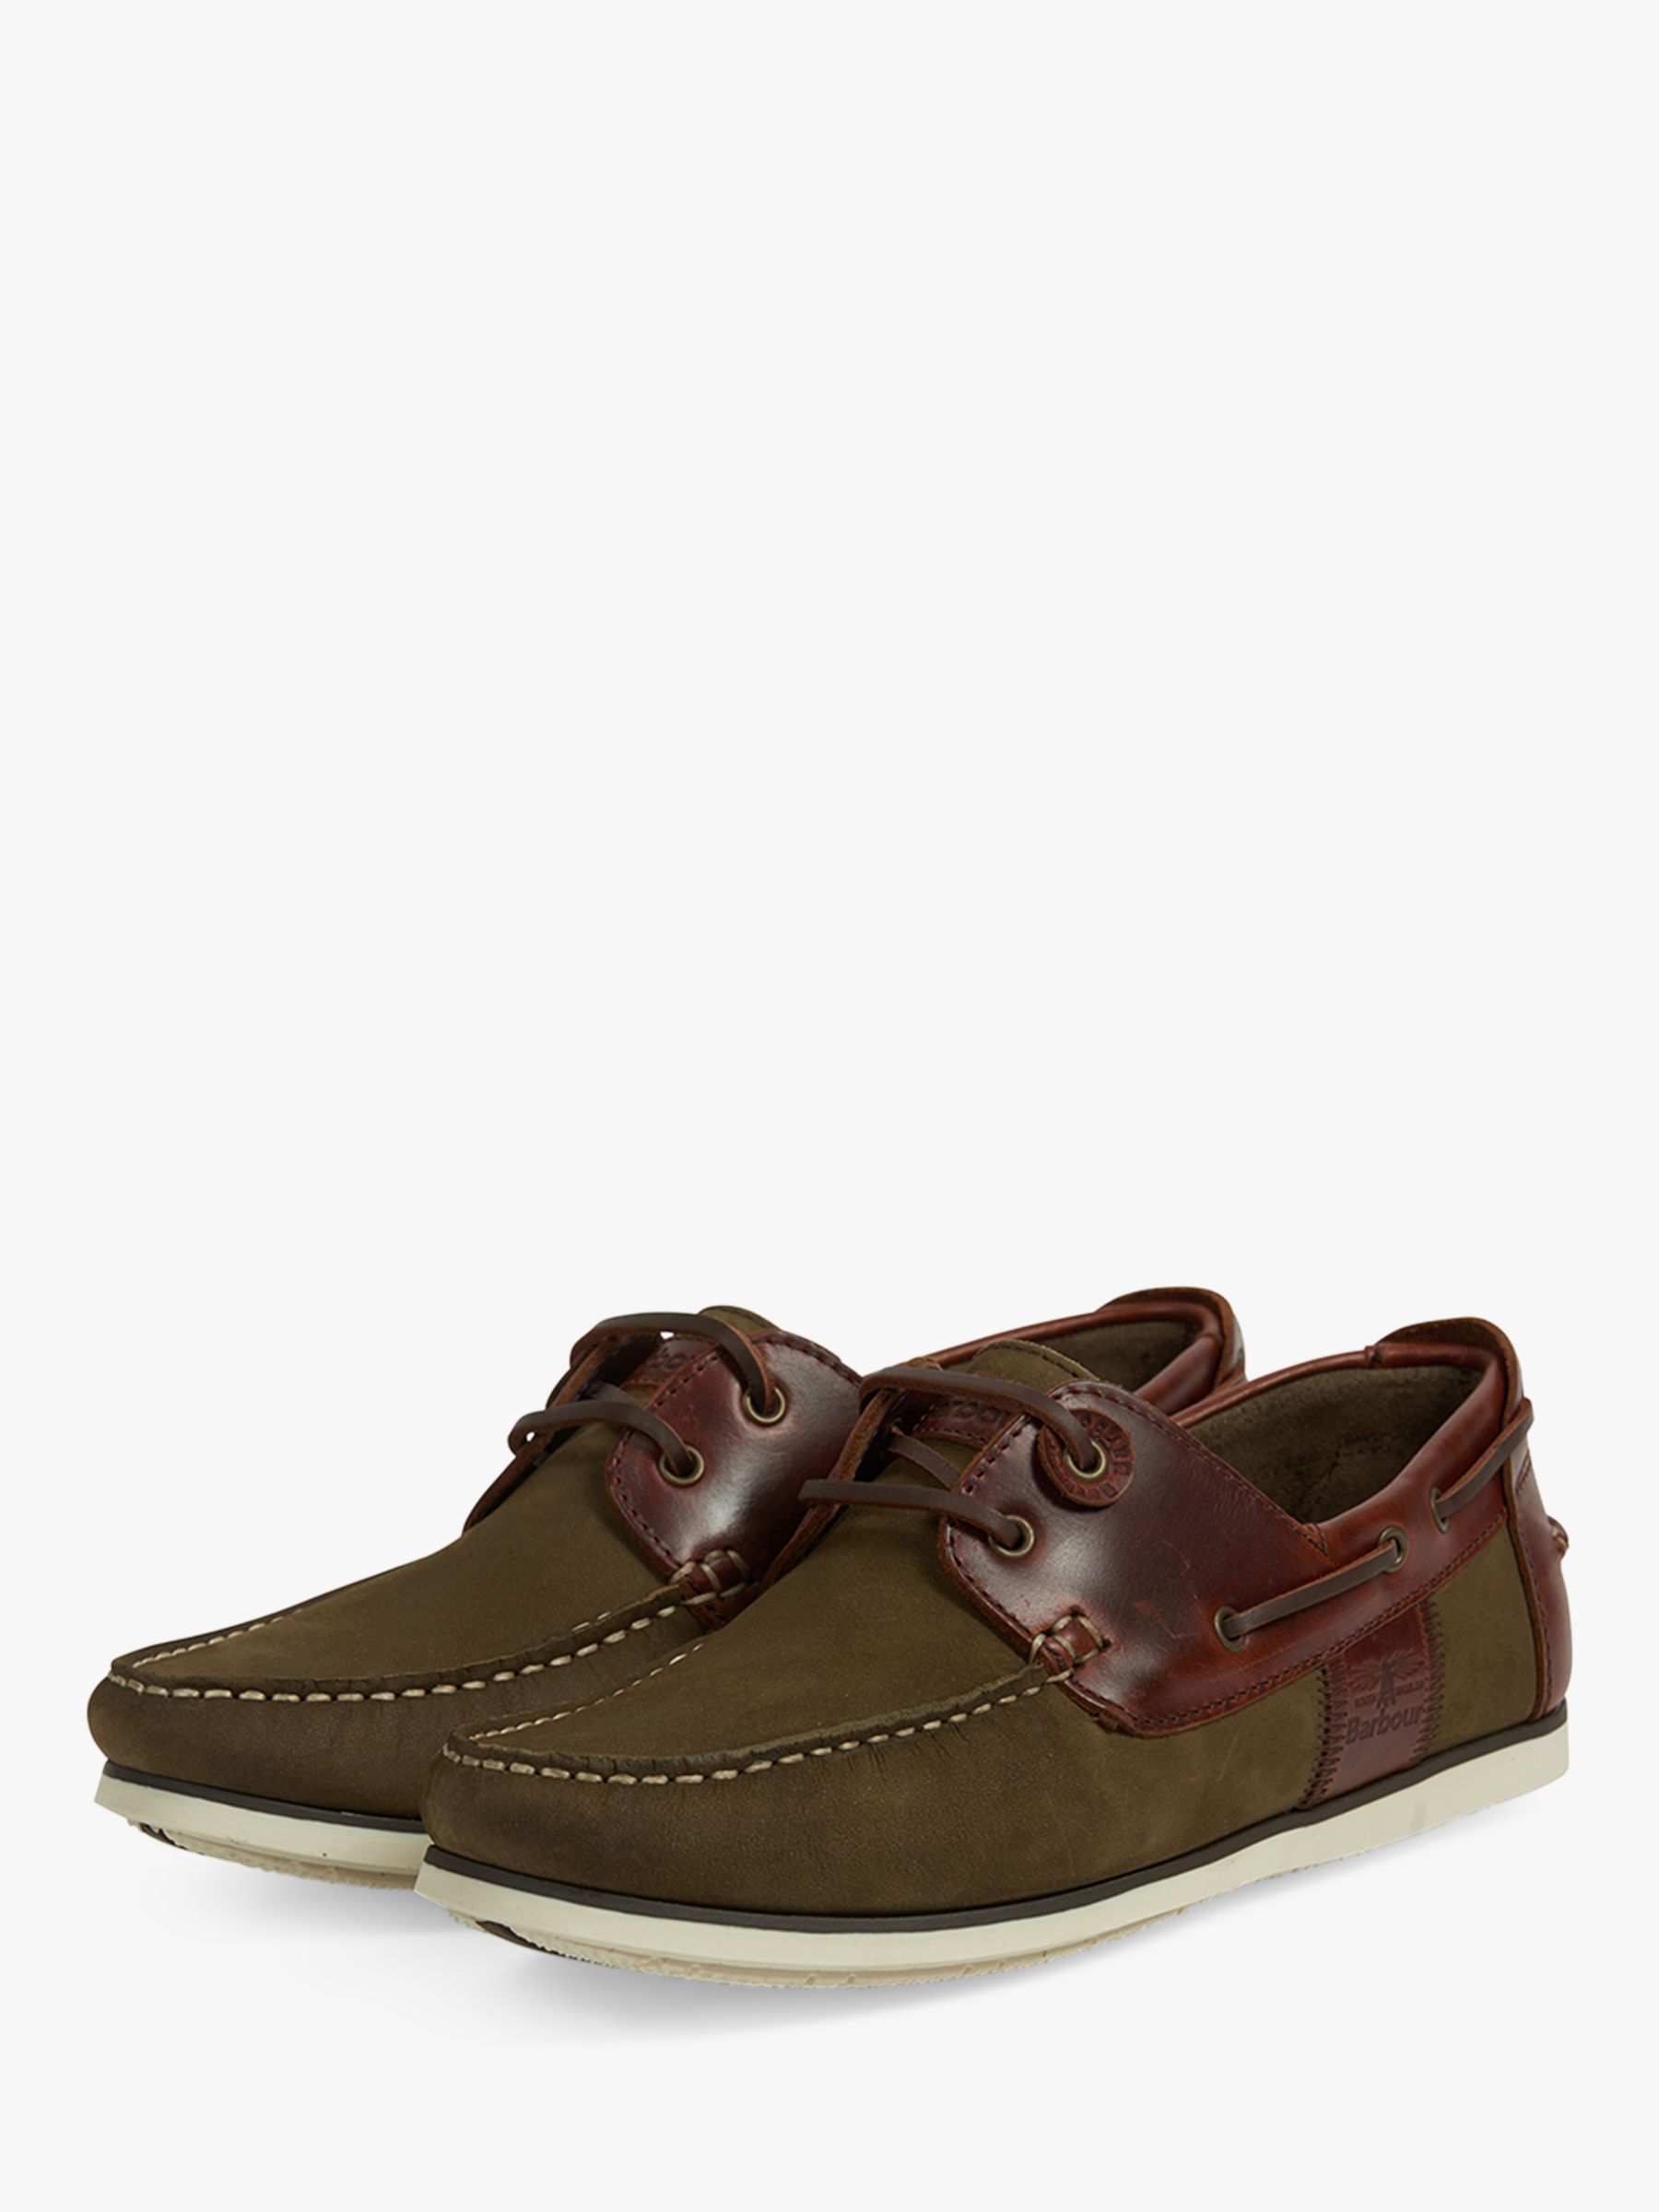 barbour capstan boat shoes brown